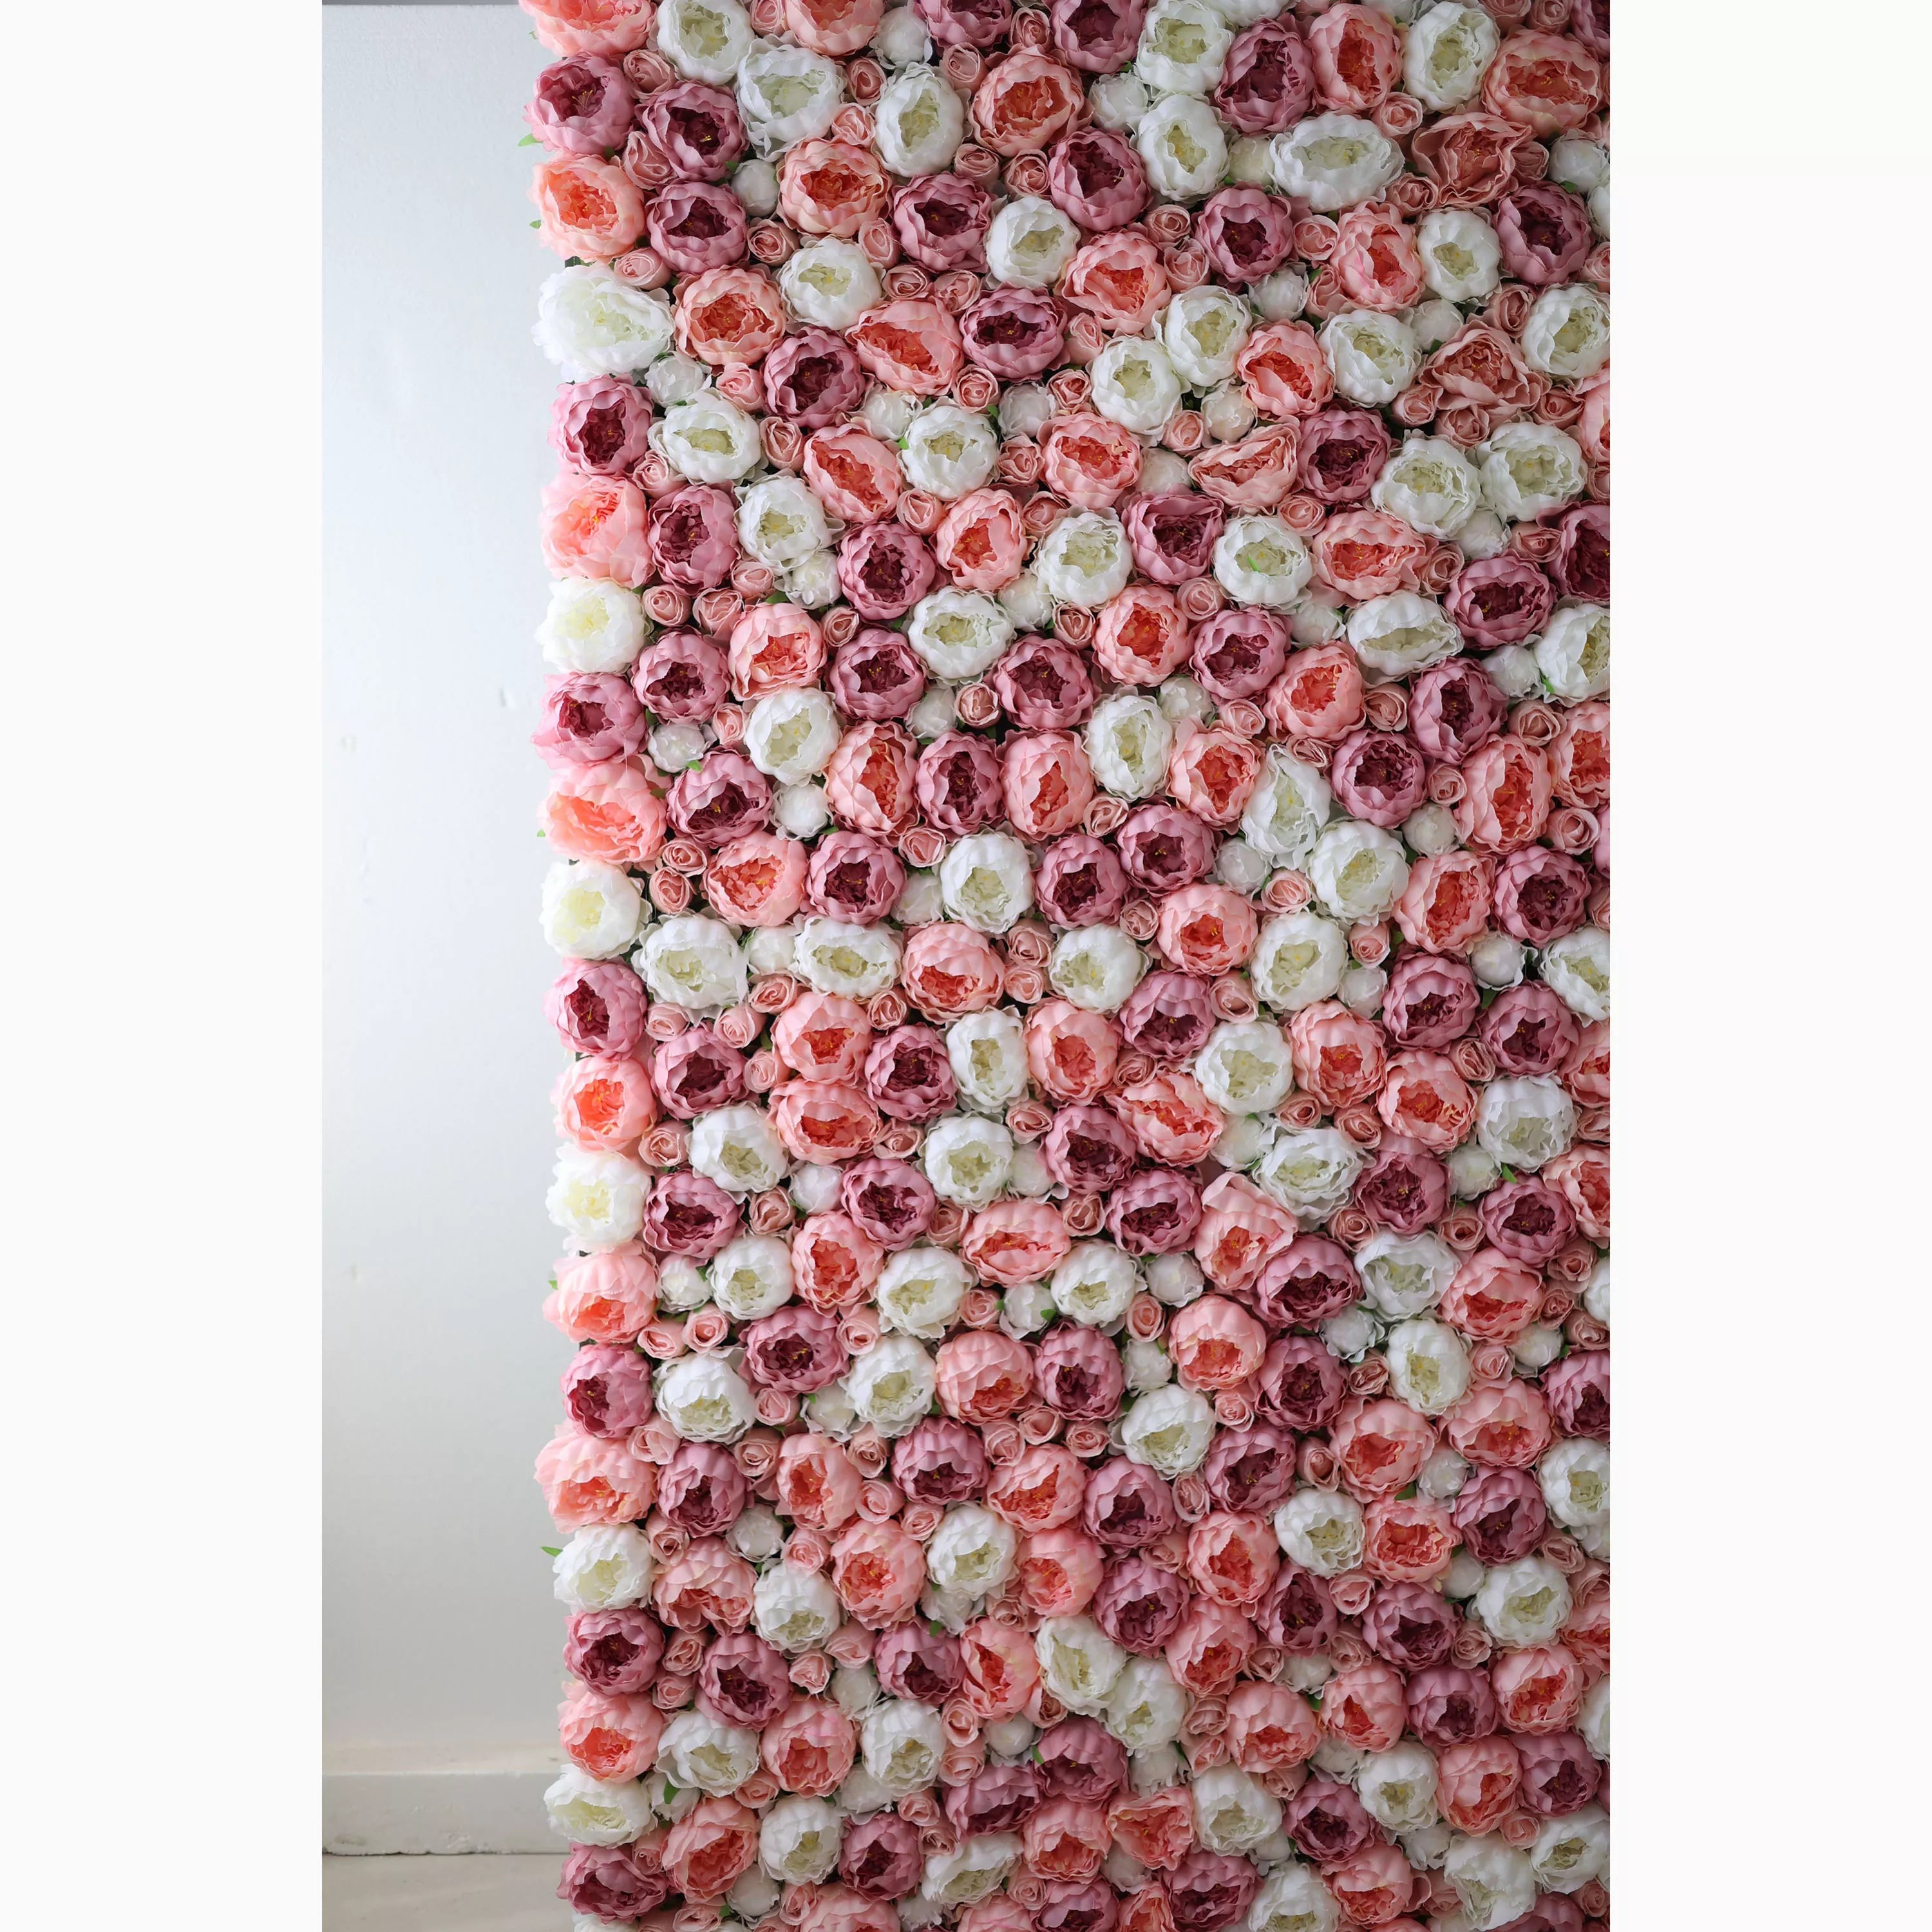 Valar Flowers Presents: Blush and Whisper – A Dreamy Assembly of Light Pink & Cream Fabric Roses – Perfect Floral Wall for Weddings, Events & Elegant Interior Decor.-VF-216